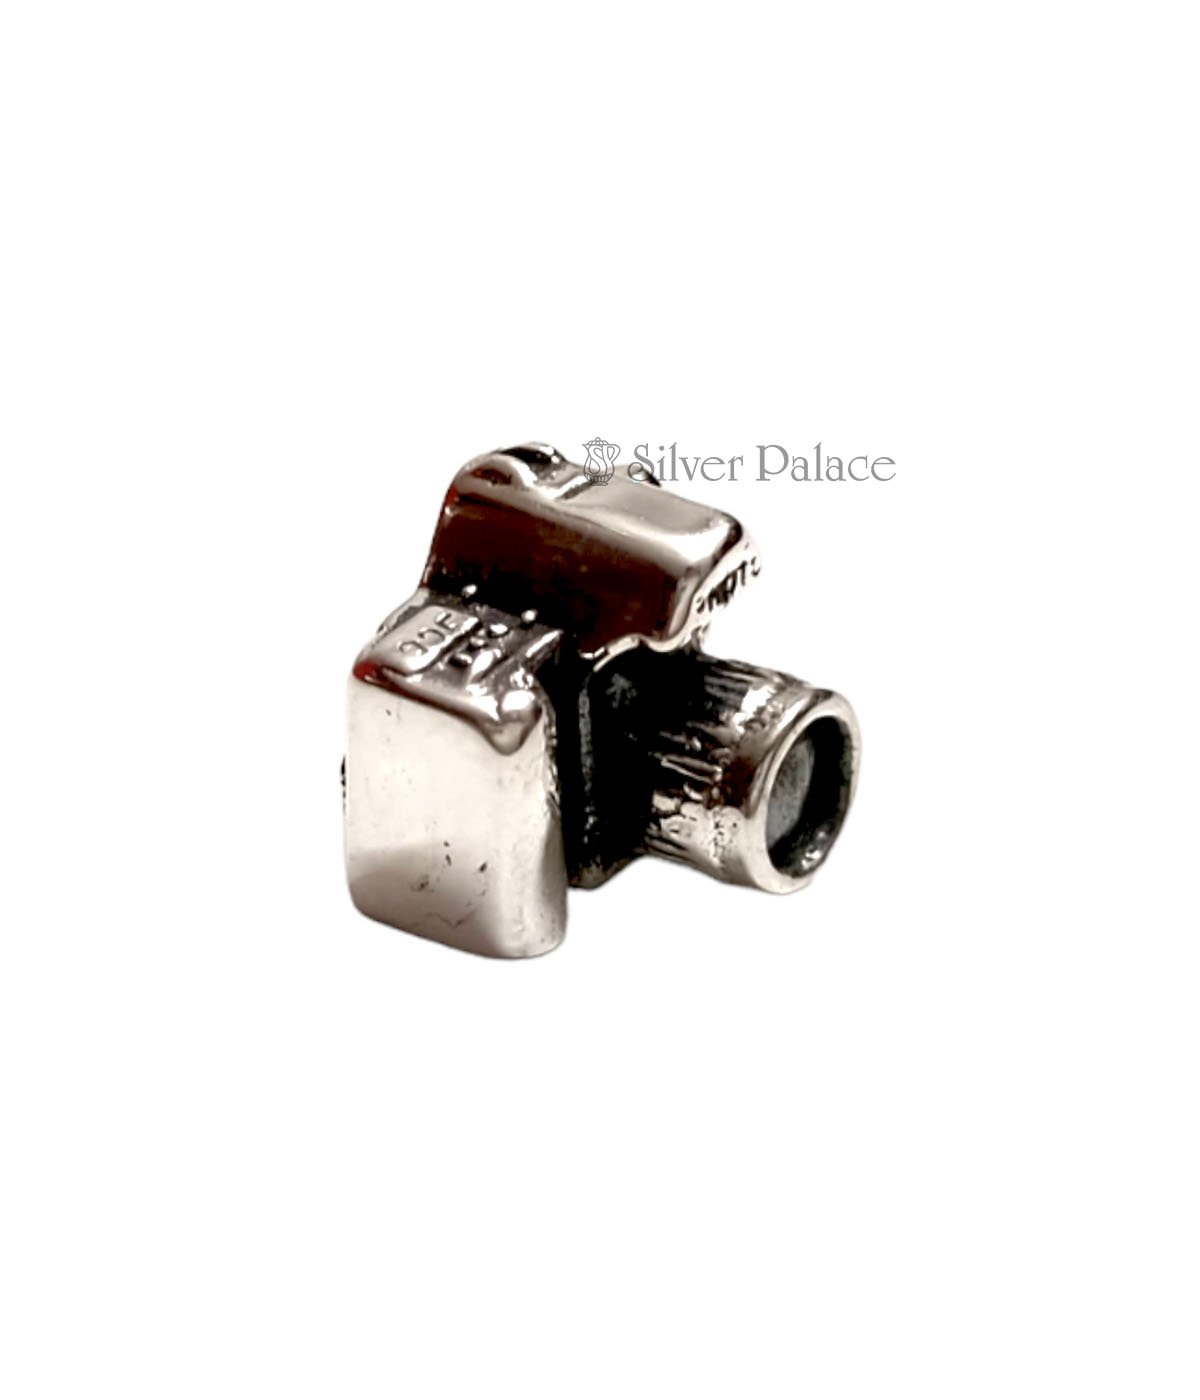 STERLING SILVER MINIATURE CAMERA FOR GIFT